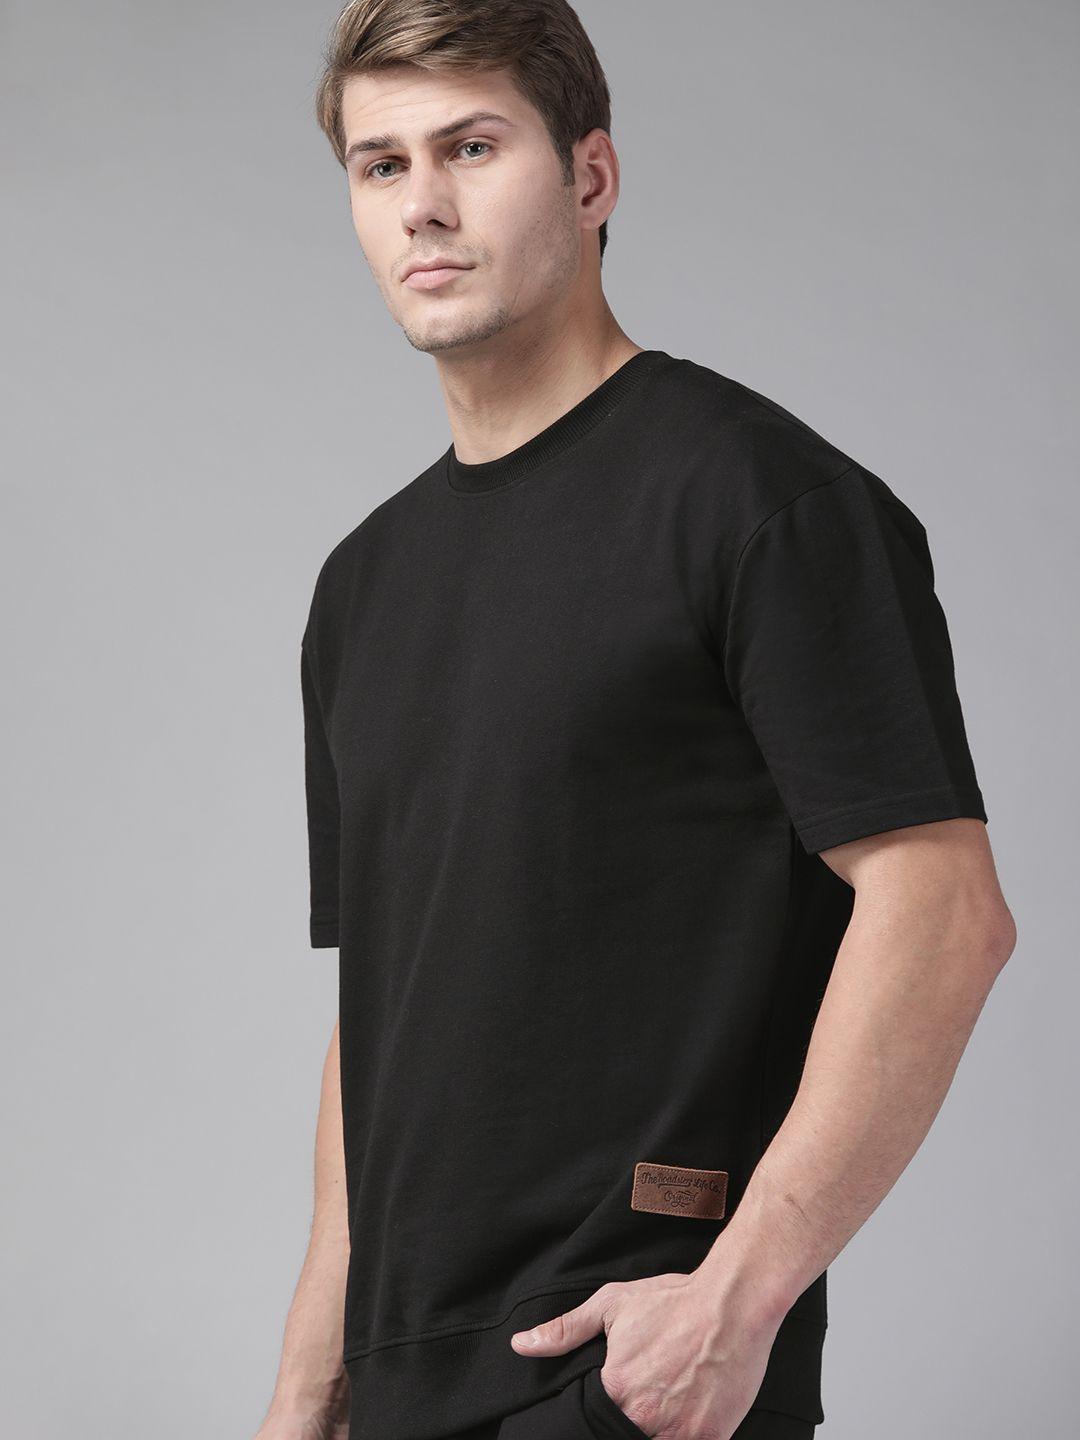 the roadster lifestyle co men black relaxed fit sweatshirt